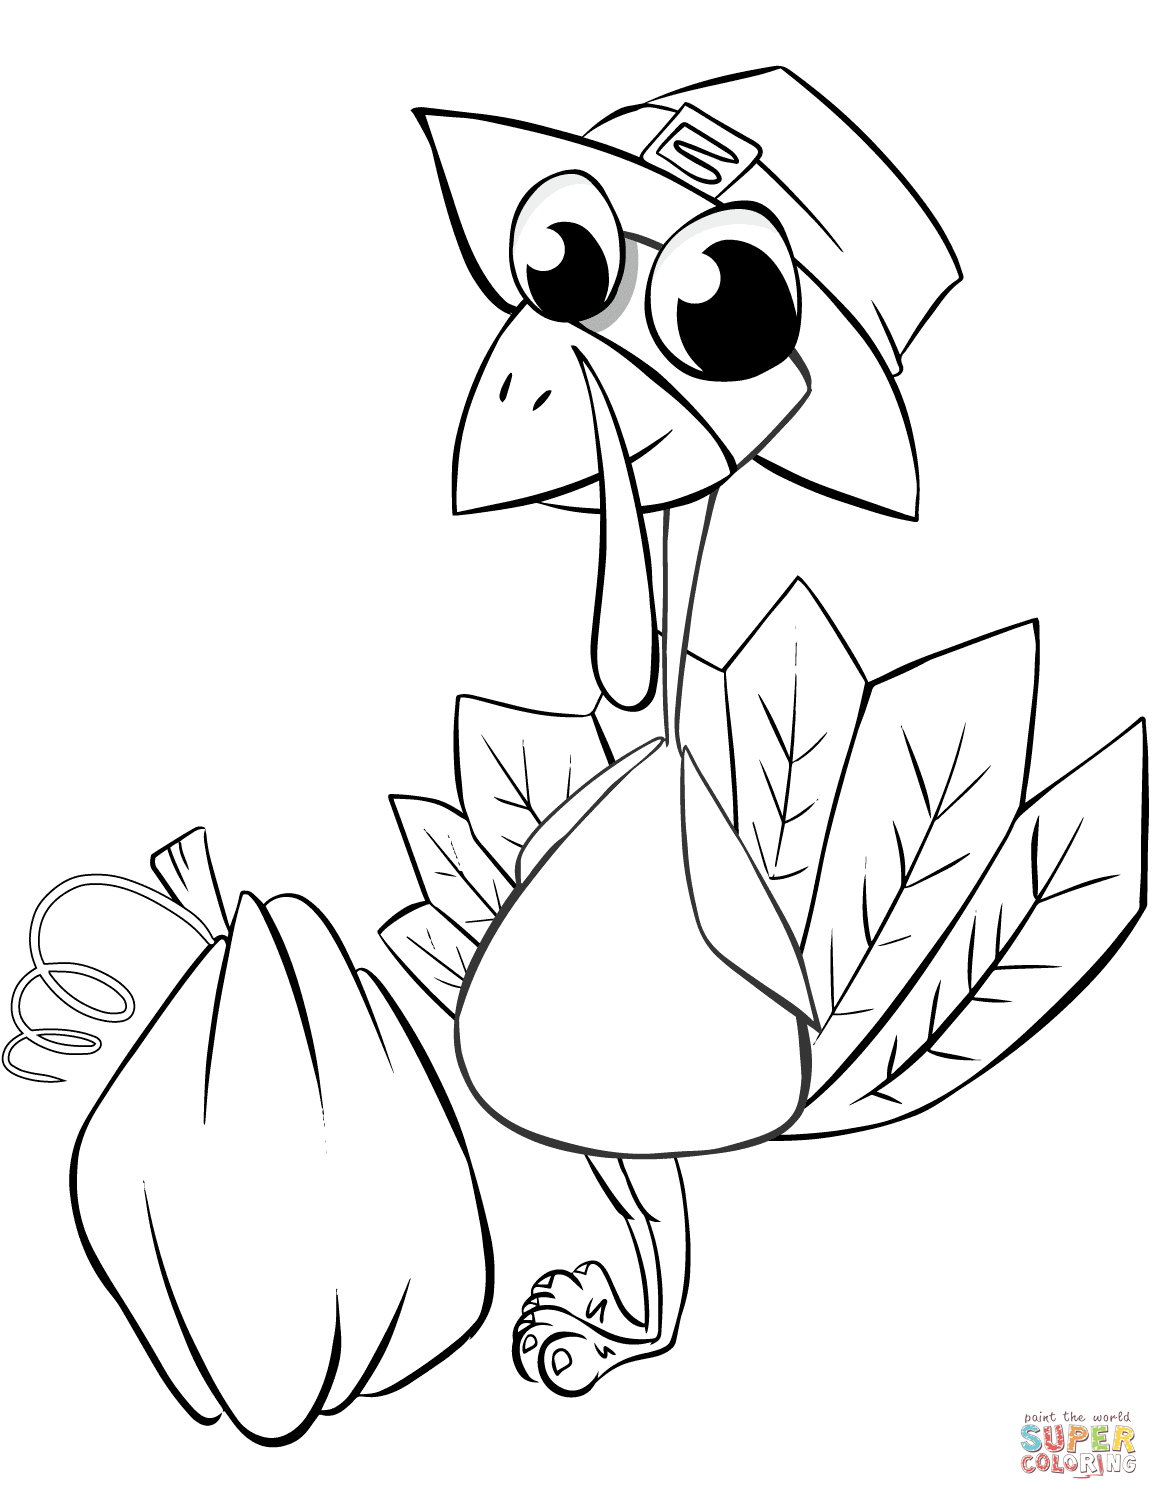 Turkey Coloring Pages | Free Coloring Pages - Free Printable Pictures Of Turkeys To Color